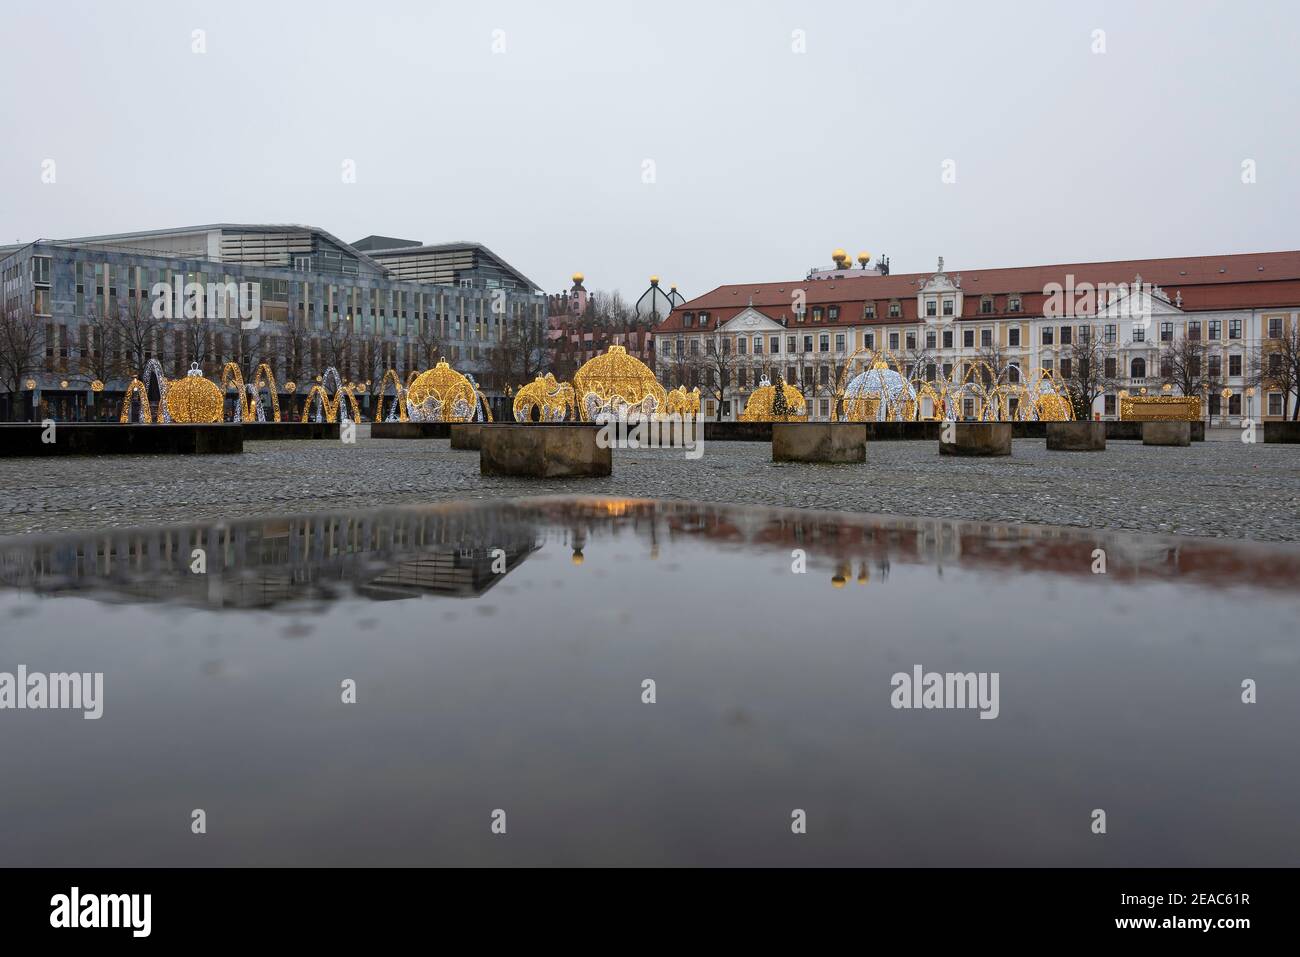 Germany, Saxony-Anhalt, Magdeburg, Christmas balls and other luminous sculptures are set up on the Domplatz. The state parliament of Saxony-Anhalt, the Hundertwasserhaus and the Norddeutsche Landesbank can be seen in the background. Stock Photo